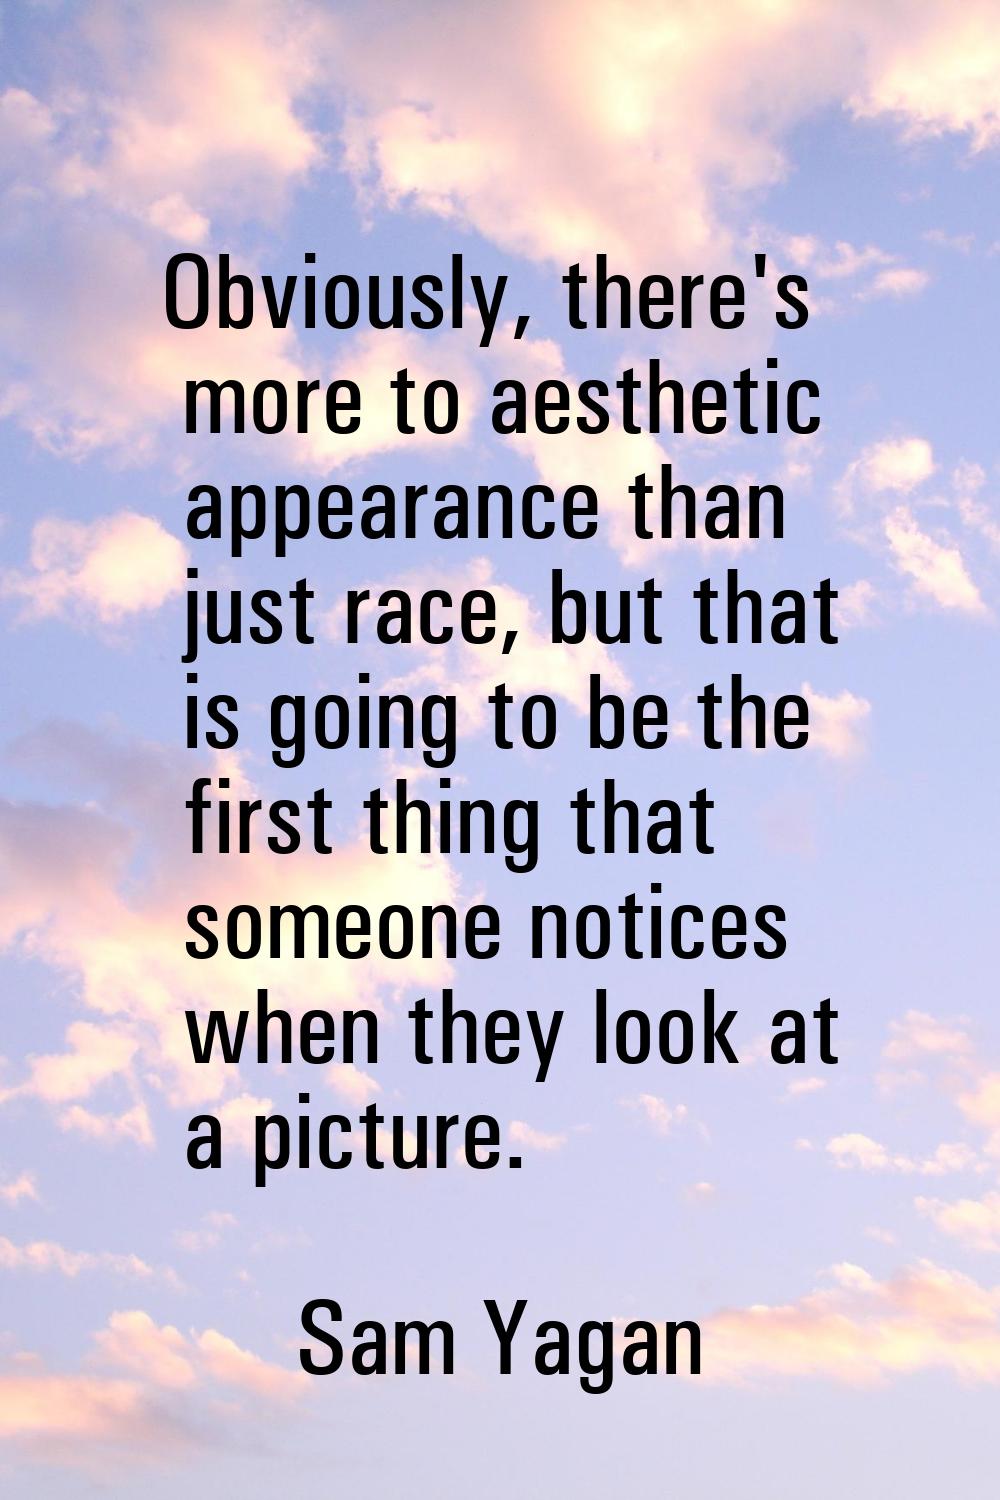 Obviously, there's more to aesthetic appearance than just race, but that is going to be the first t